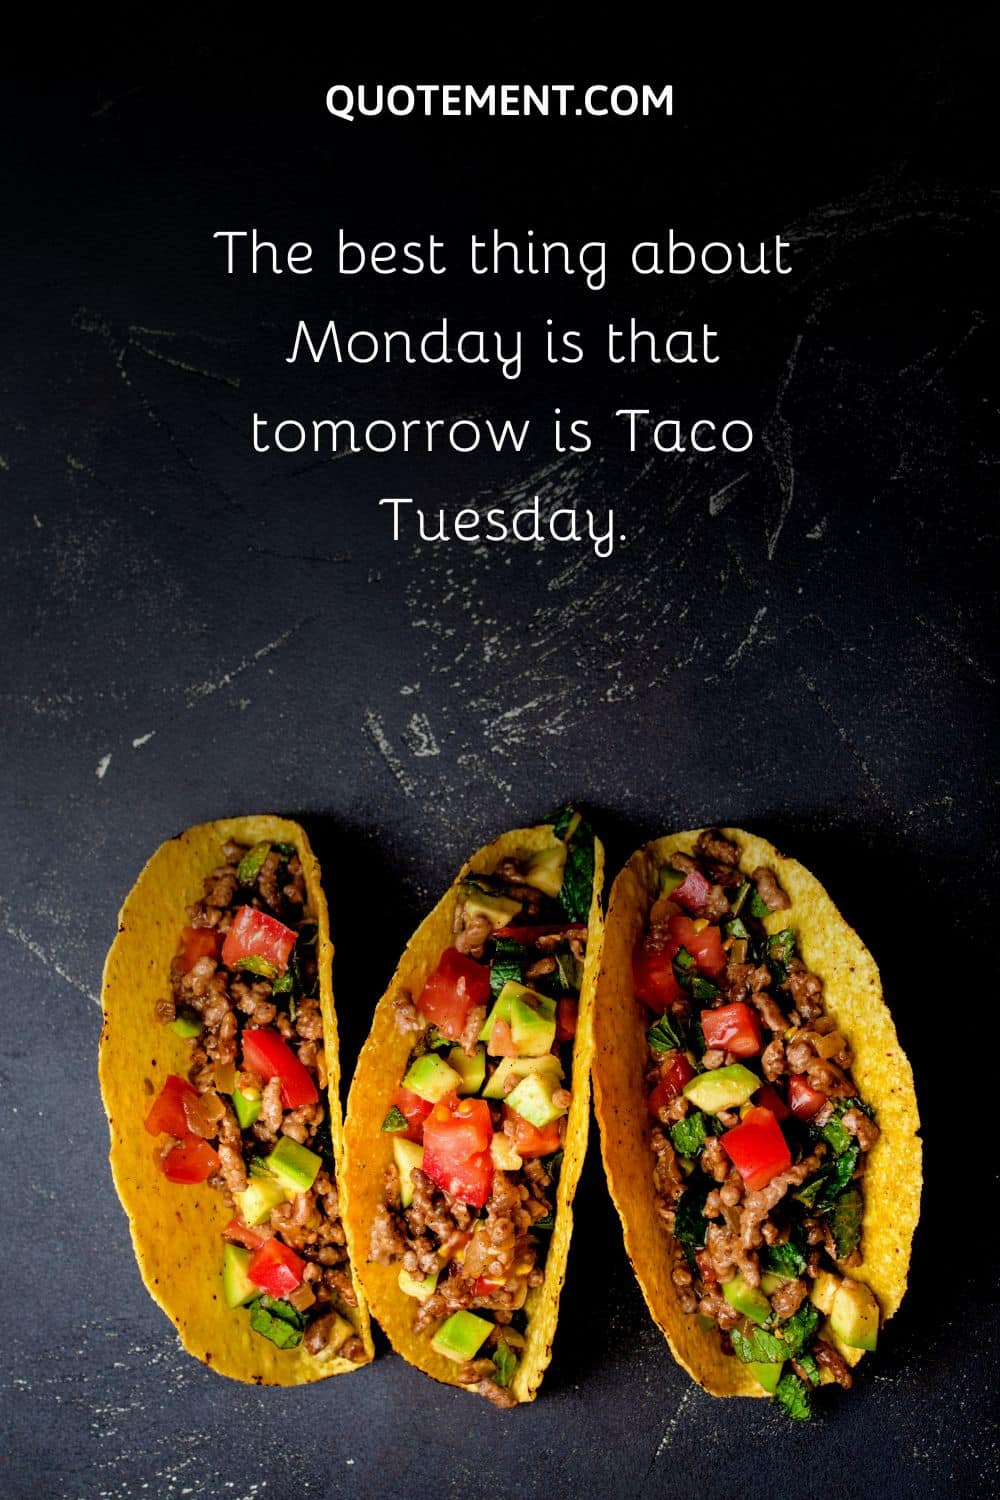 The best thing about Monday is that tomorrow is Taco Tuesday